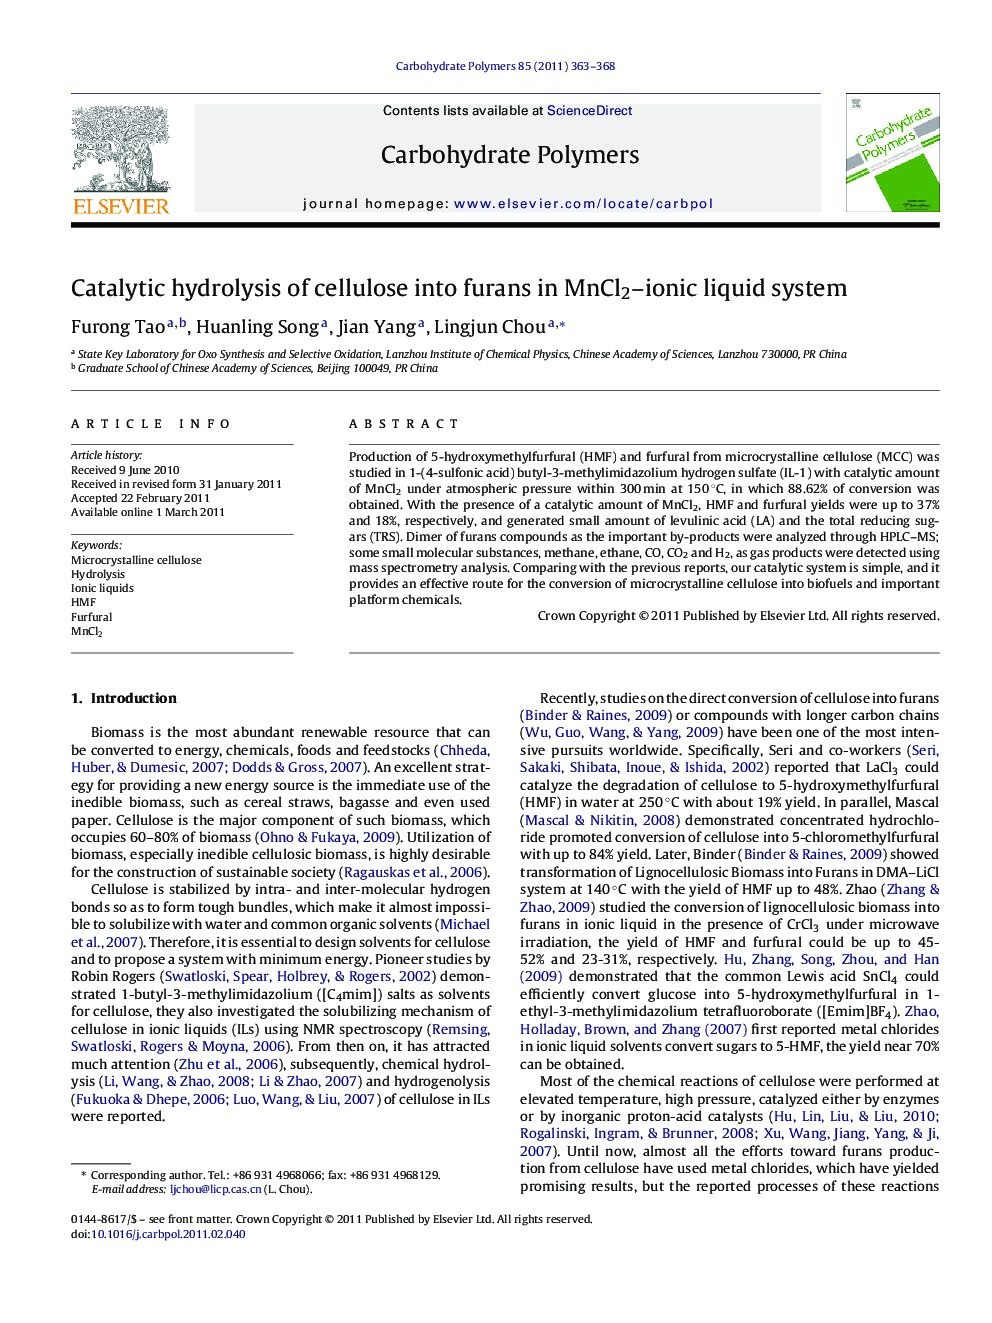 Catalytic hydrolysis of cellulose into furans in MnCl2–ionic liquid system